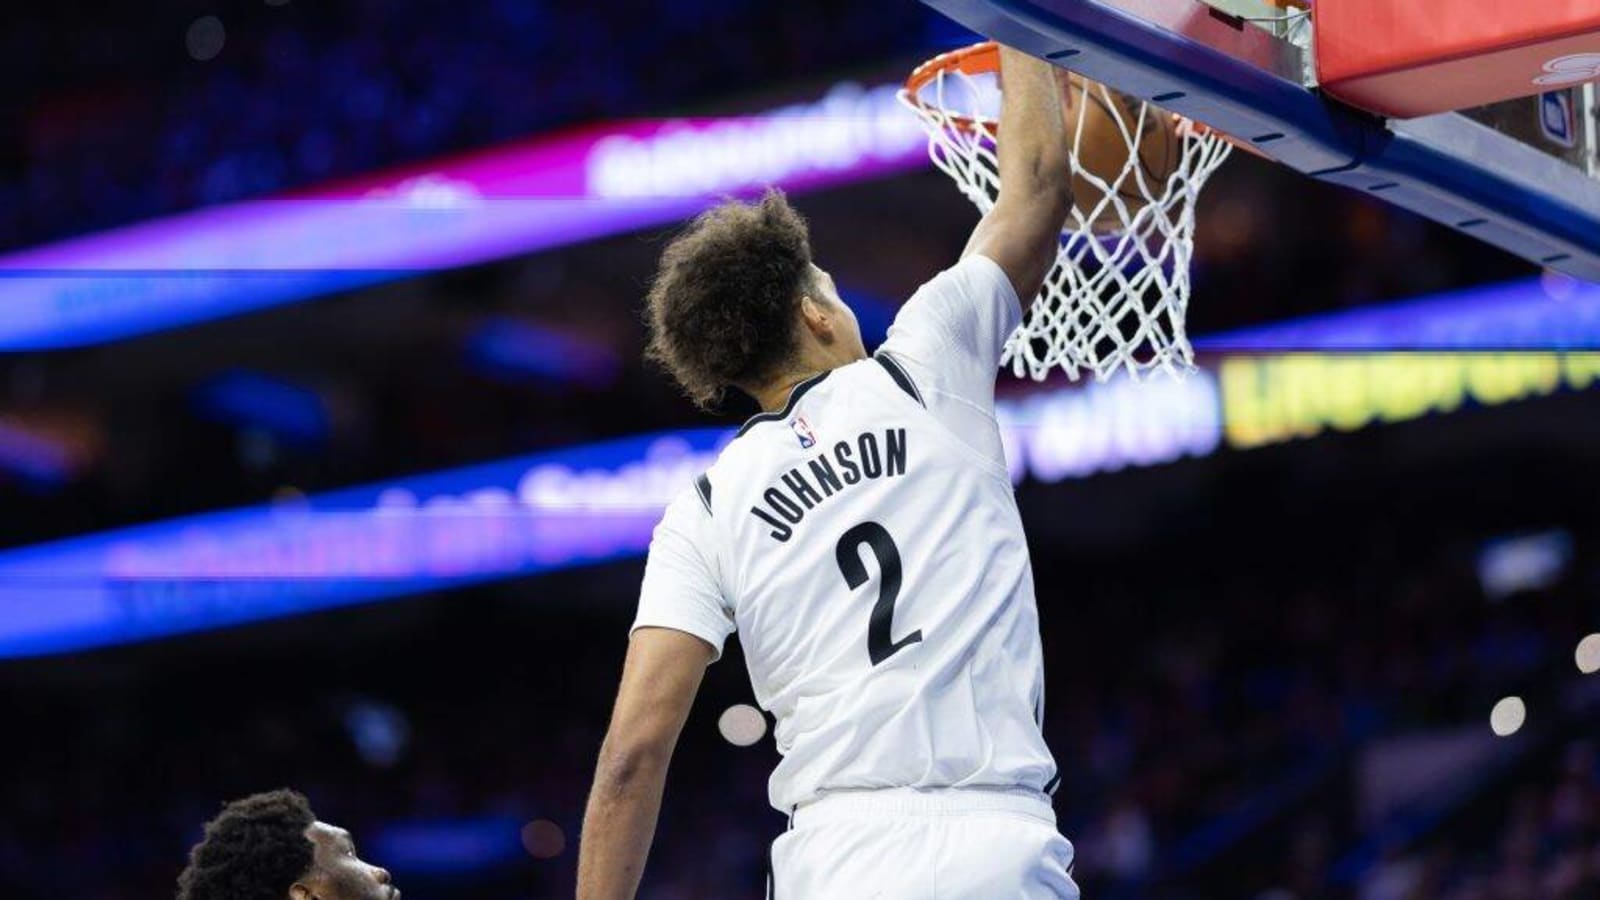 Cameron Johnson Inks New Deal With Nets